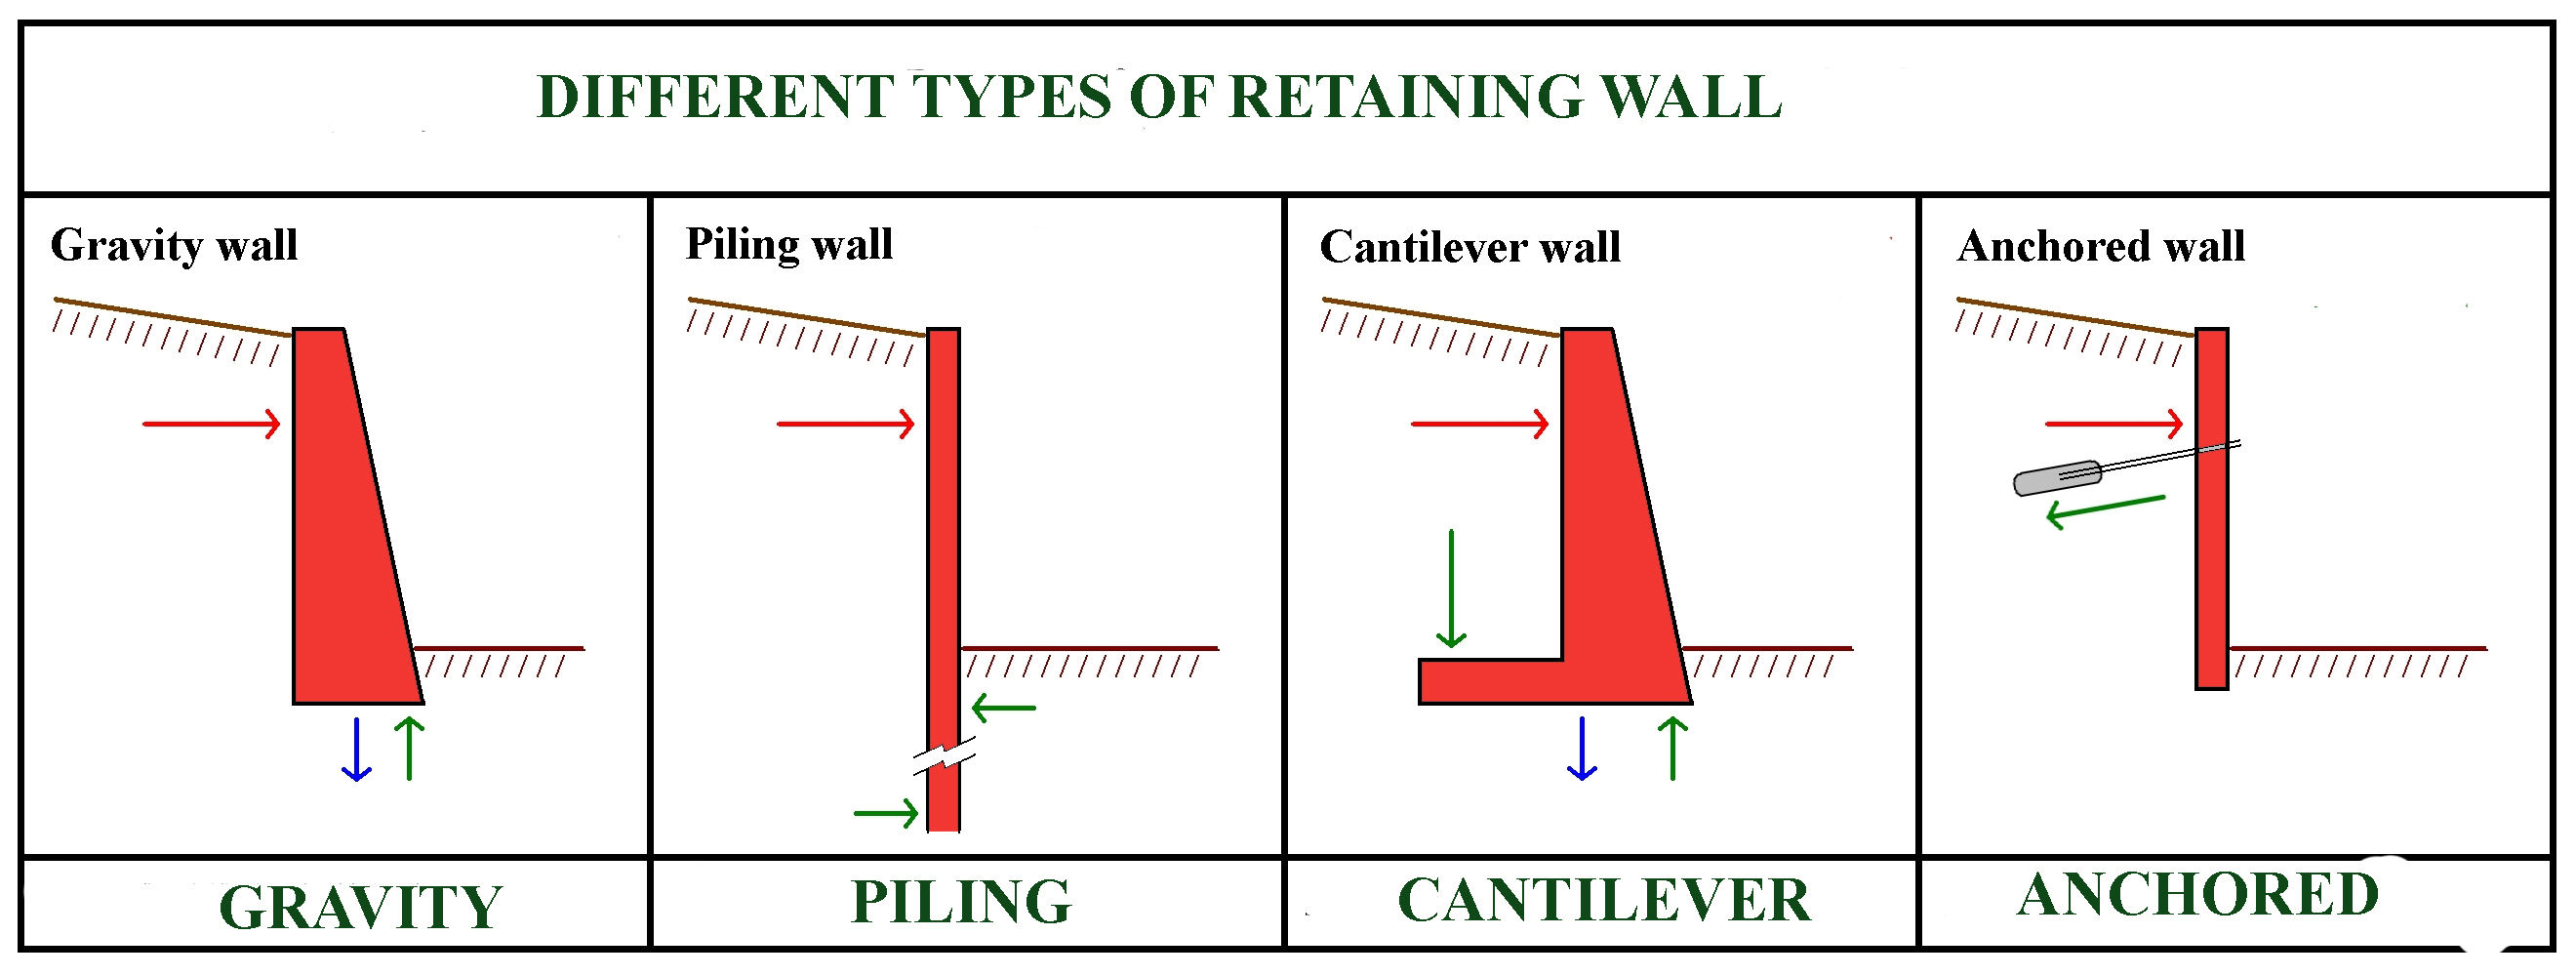 What are some examples of retaining wall designs?